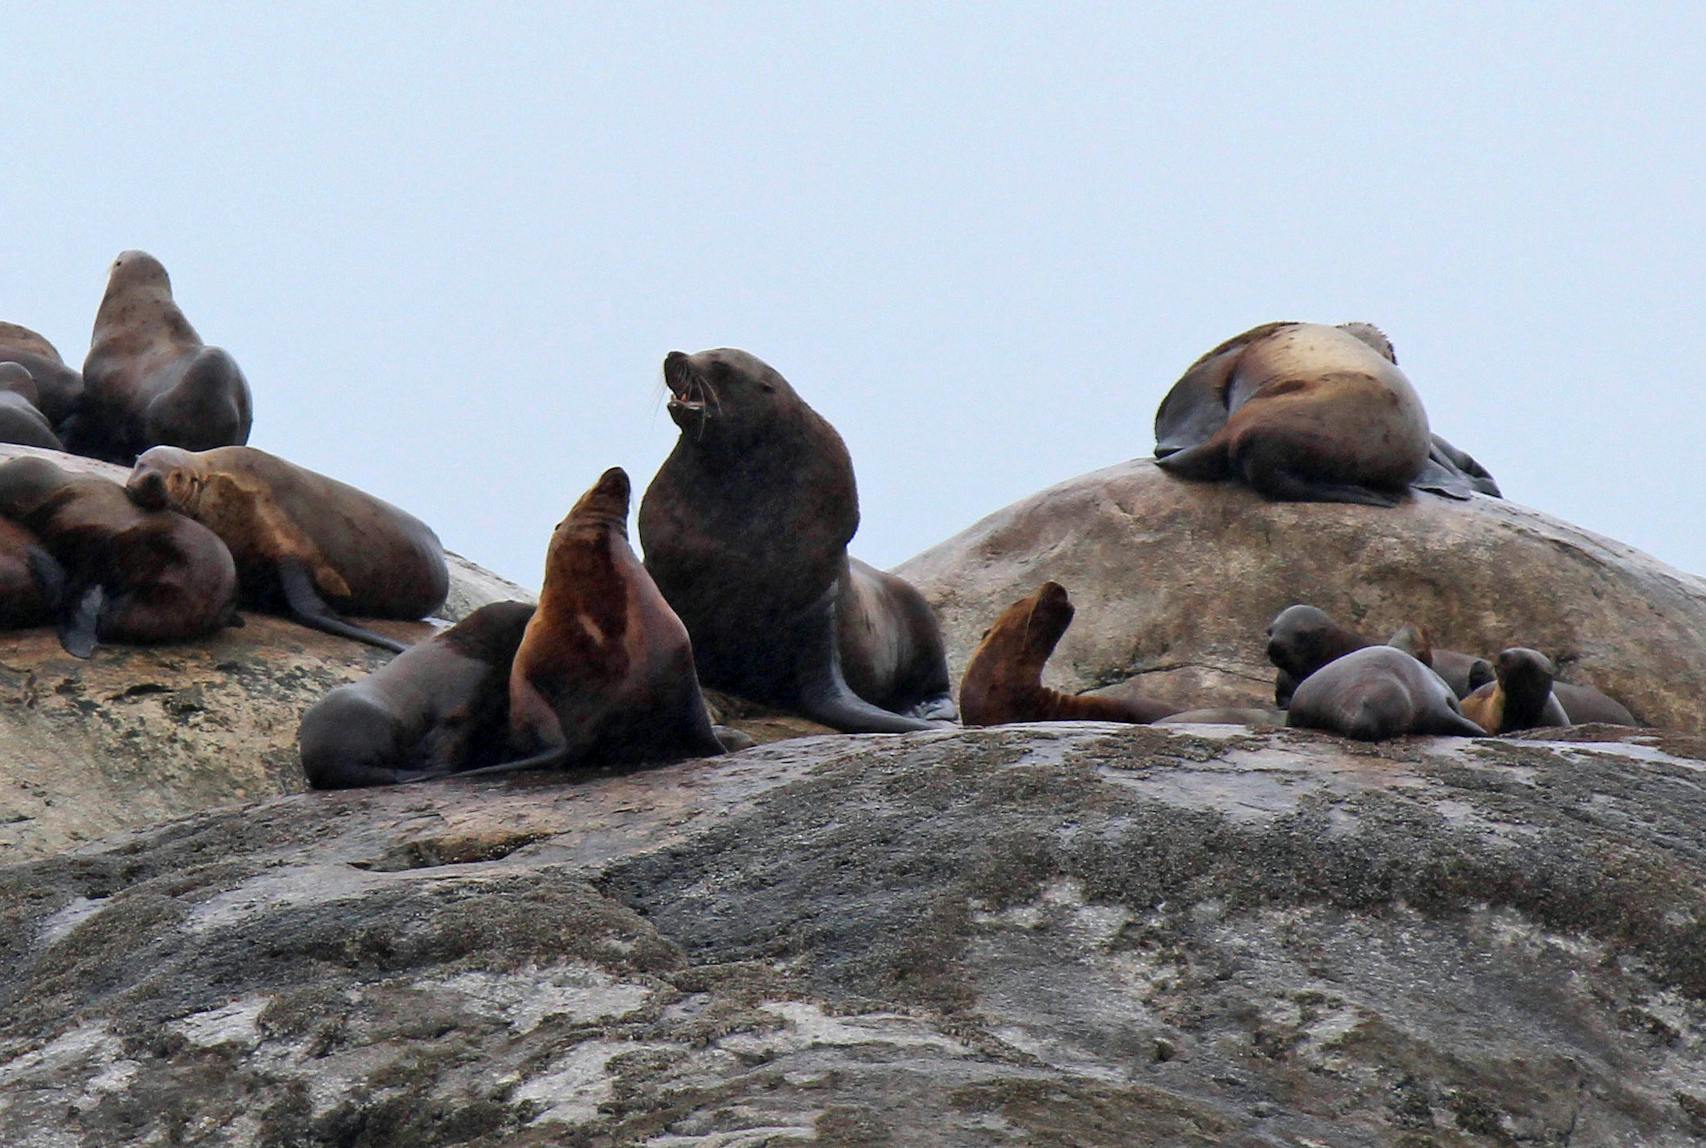 In Alaska's Glacier Bay National Park and Preserve, Steller sea lions have a major presence on a small group of rocky islands. If they are not napping, or eating, they line along 10-foot high ledges waiting for their turns to jump.